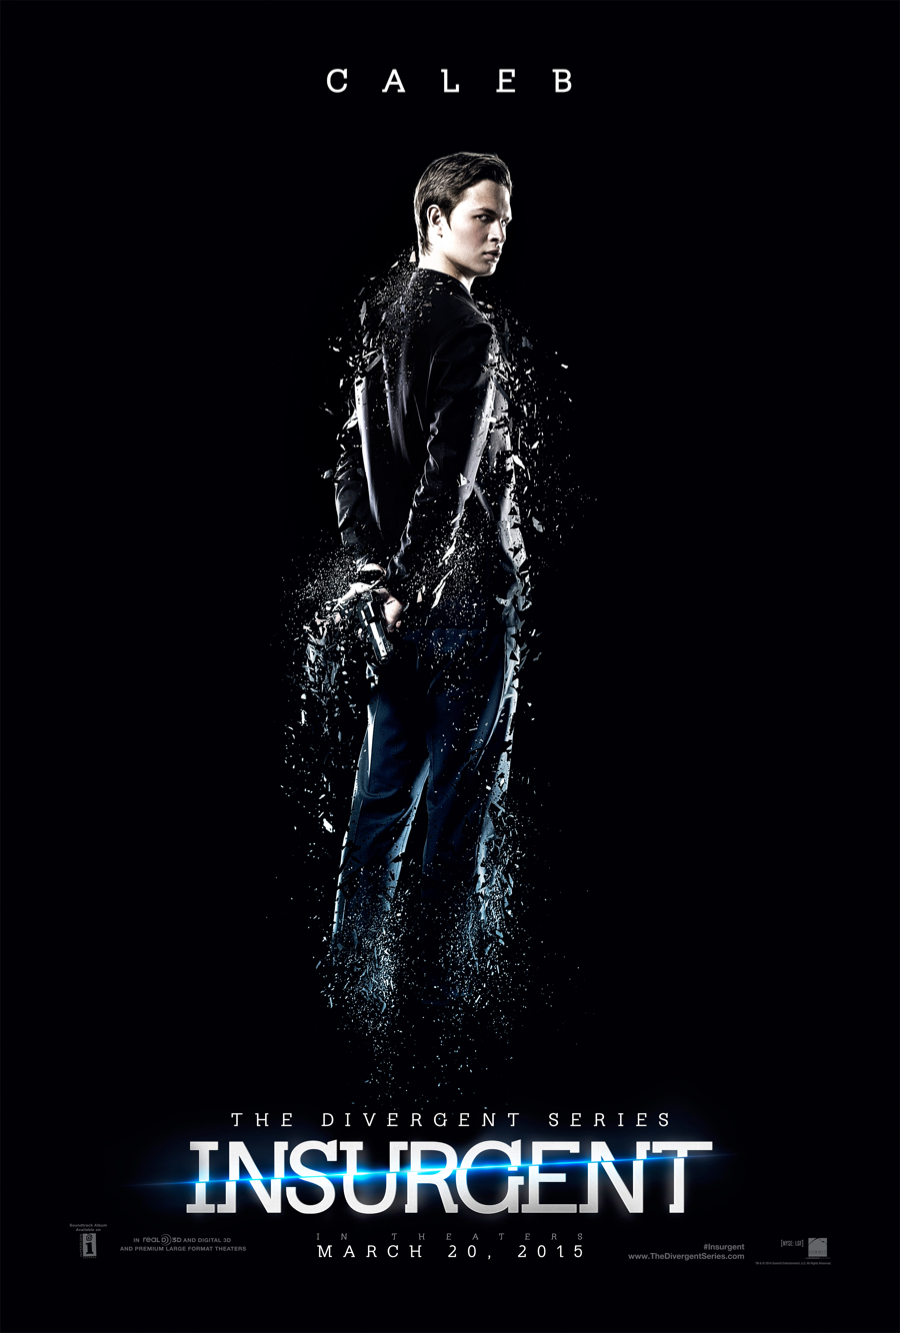 See 'Insurgent' Movie Posters + Trailer Featuring Ansel Elgort, Theo James, Miles Teller + More